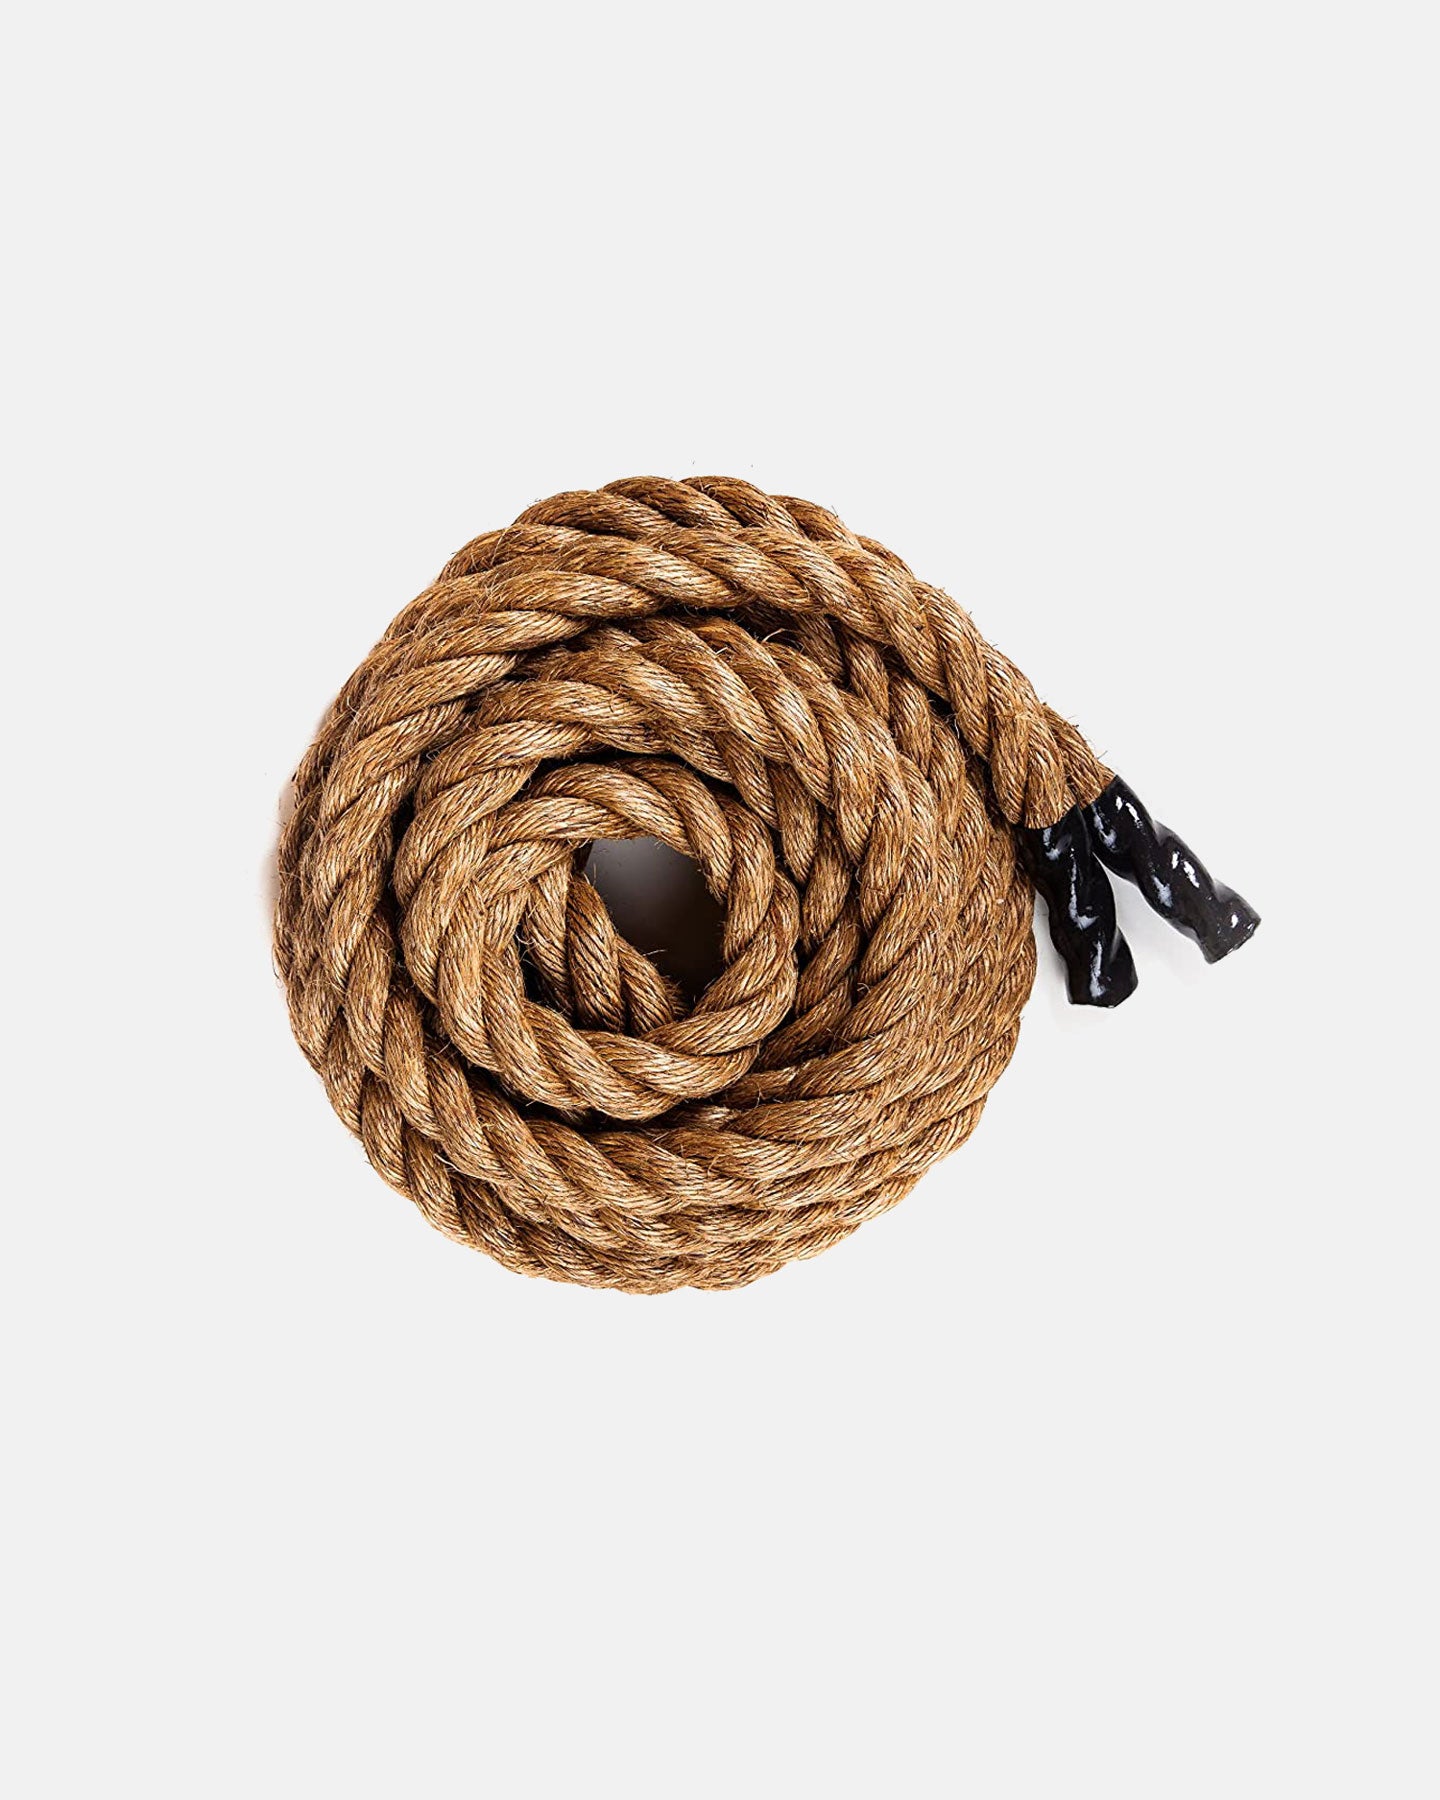 Manila Battle Rope for conditioning